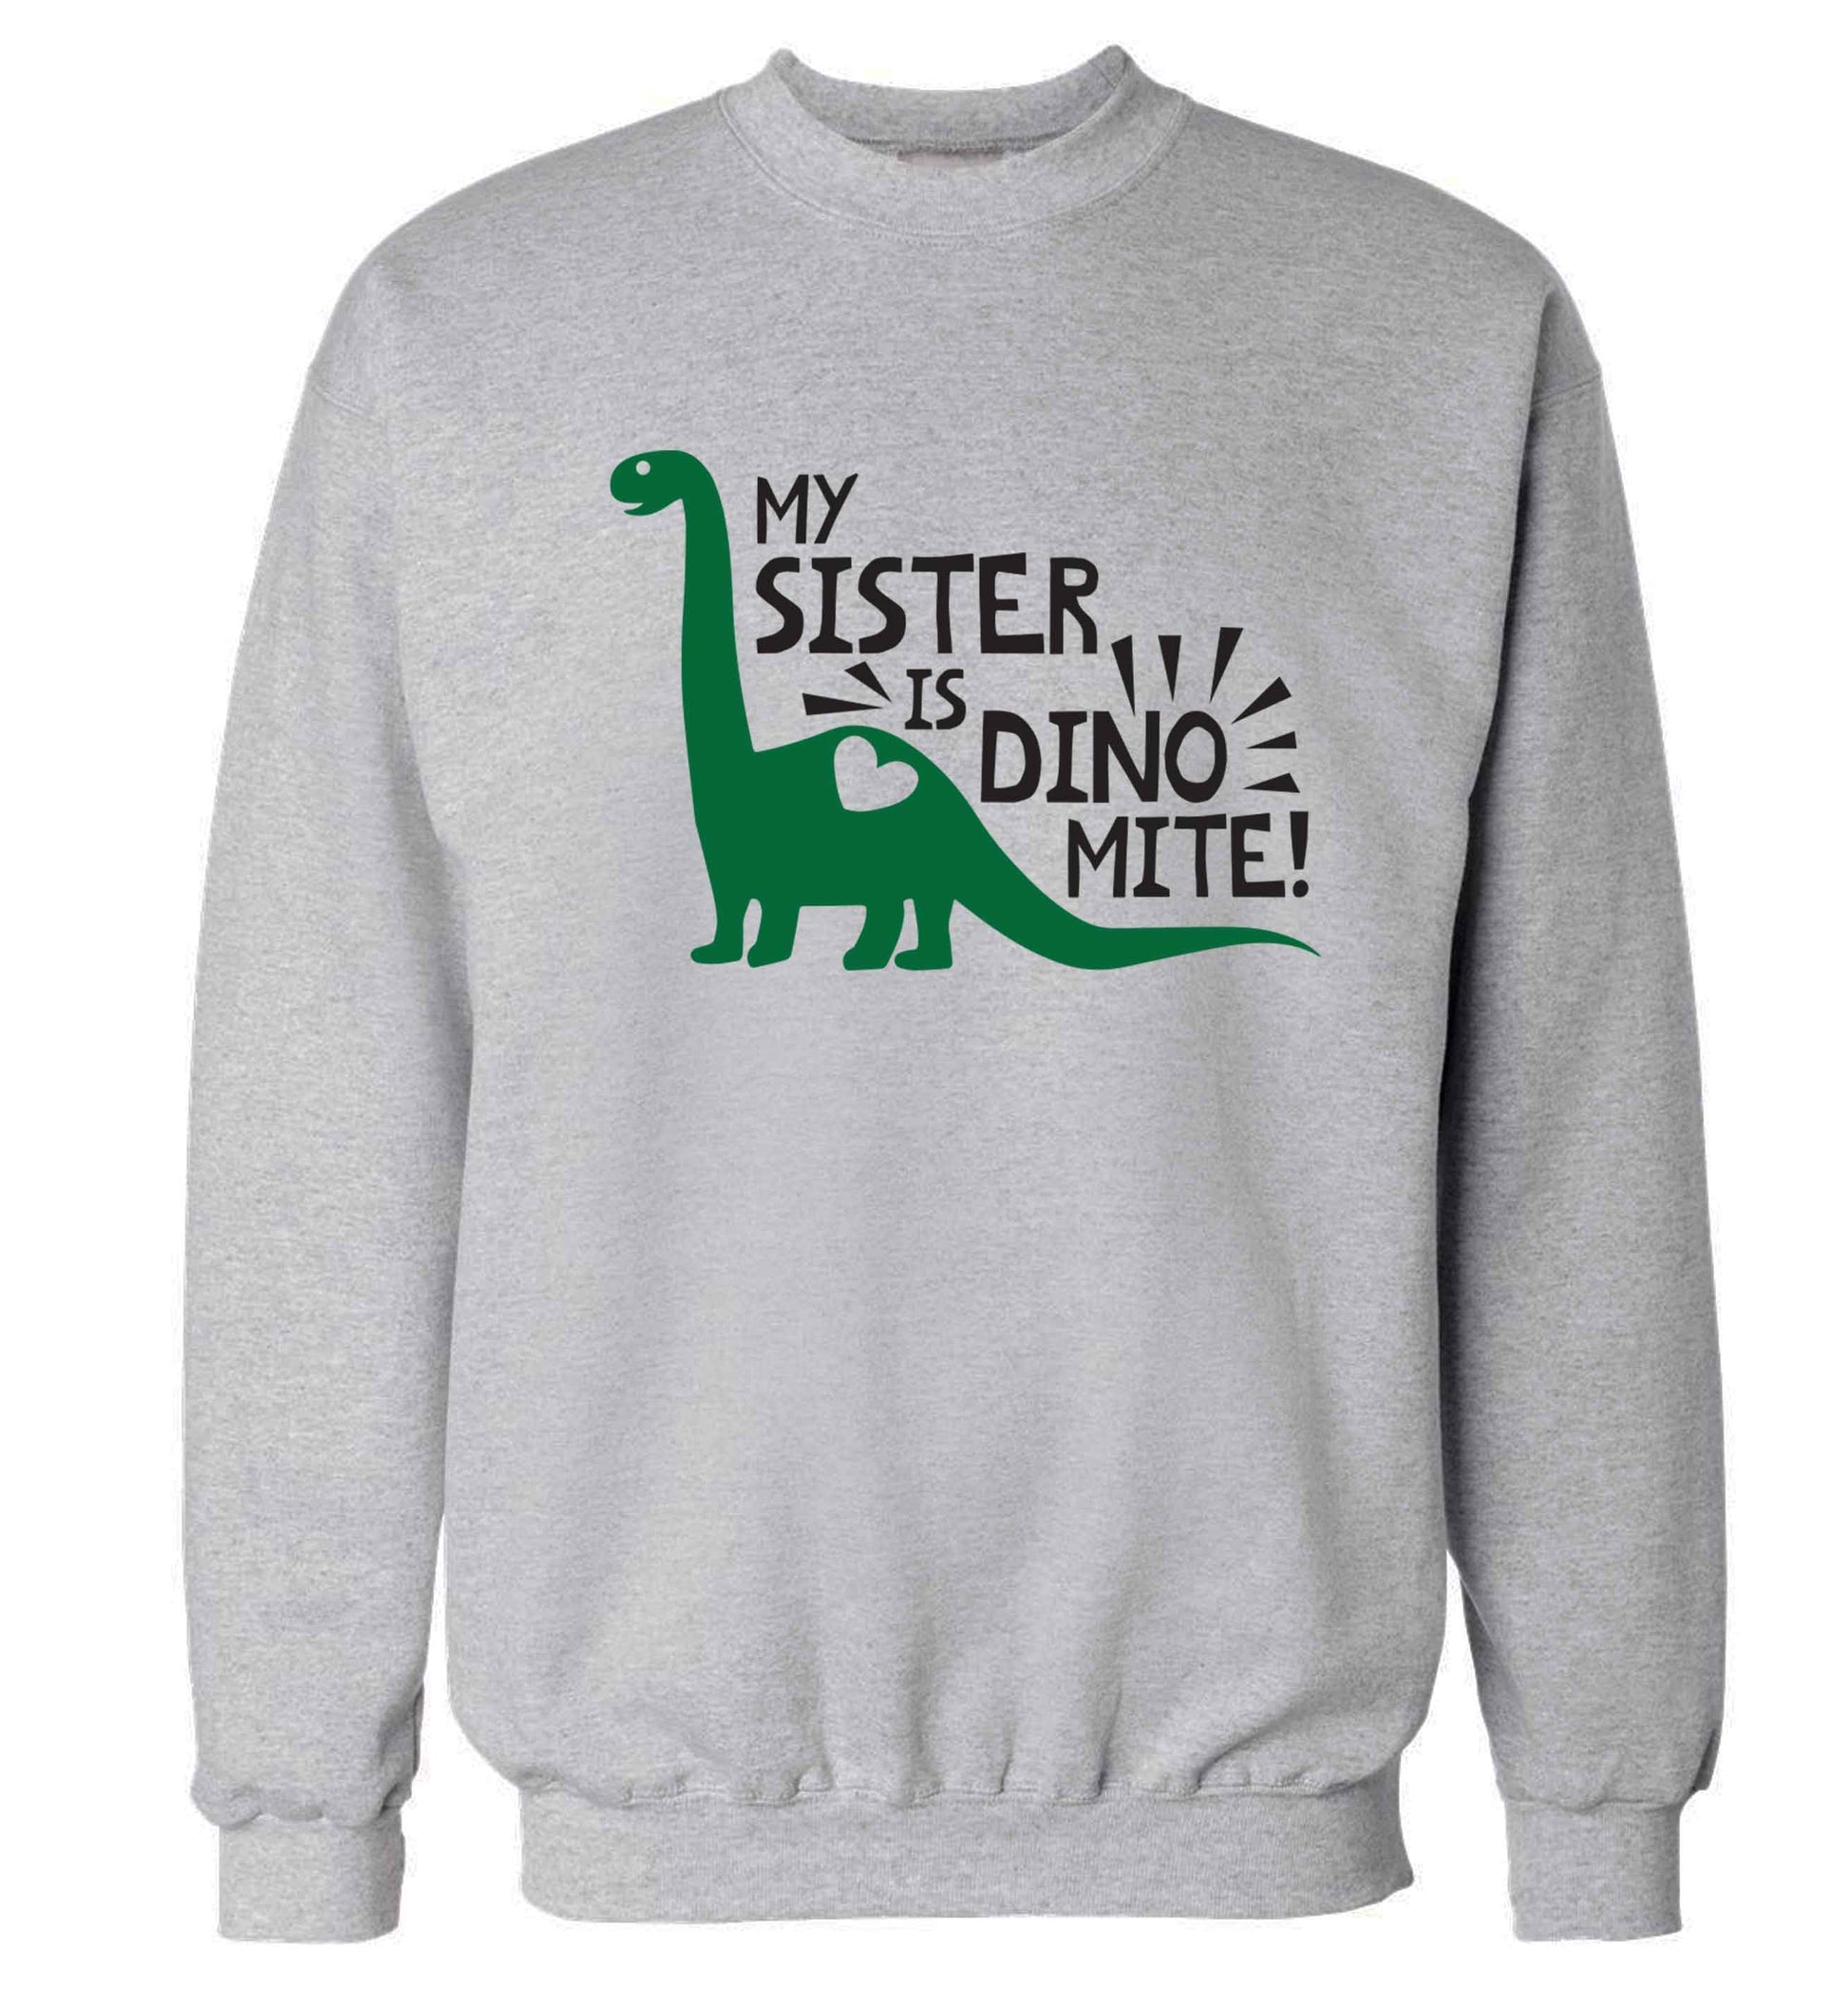 My sister is dinomite! Adult's unisex grey Sweater 2XL